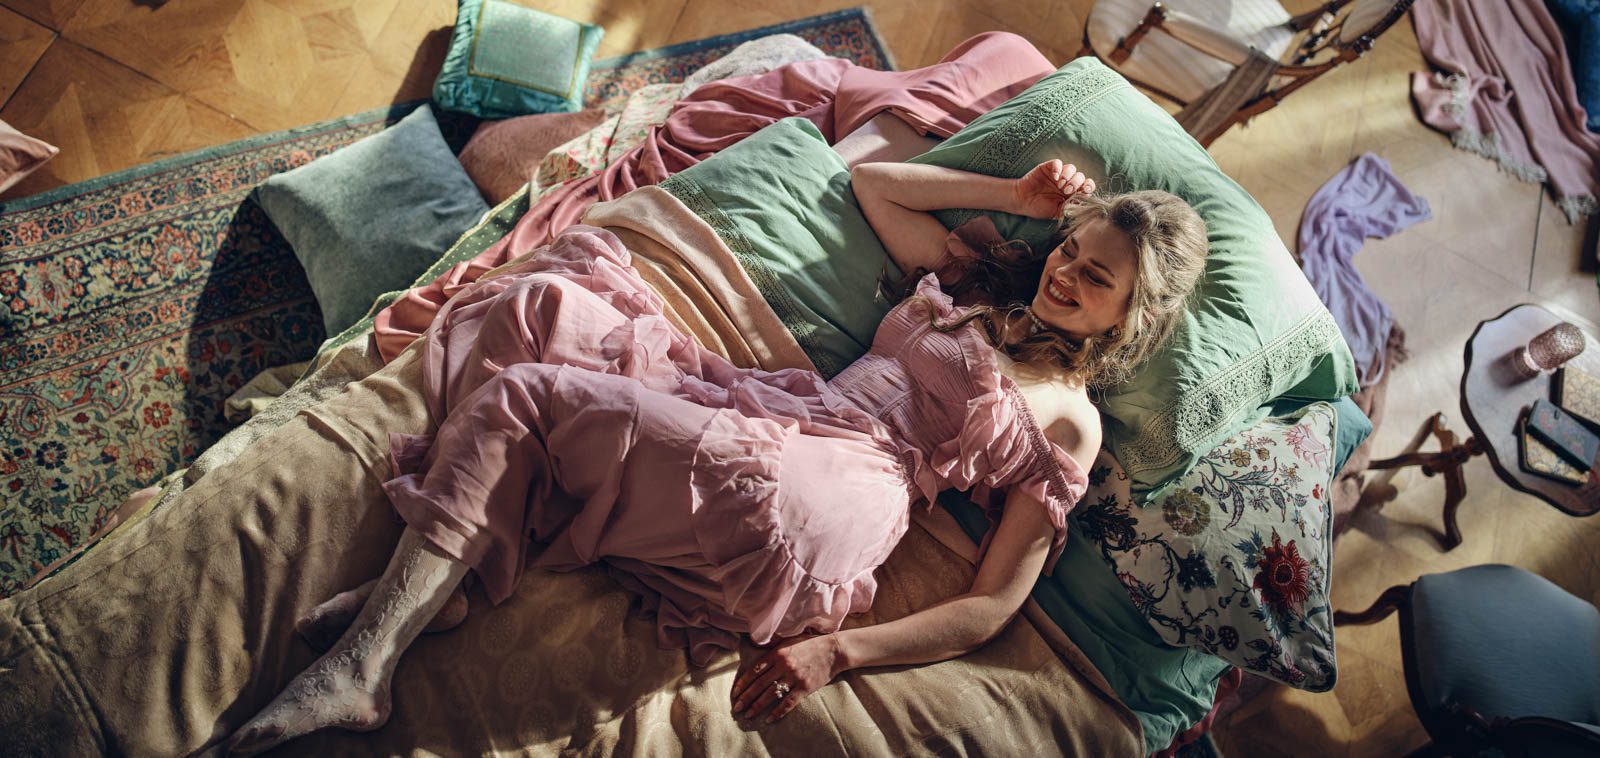 Maja Šebenik, a Slovenian actress, dressed as a princess, laying on a bed whilst filming a commercial for a new Poli Green product.